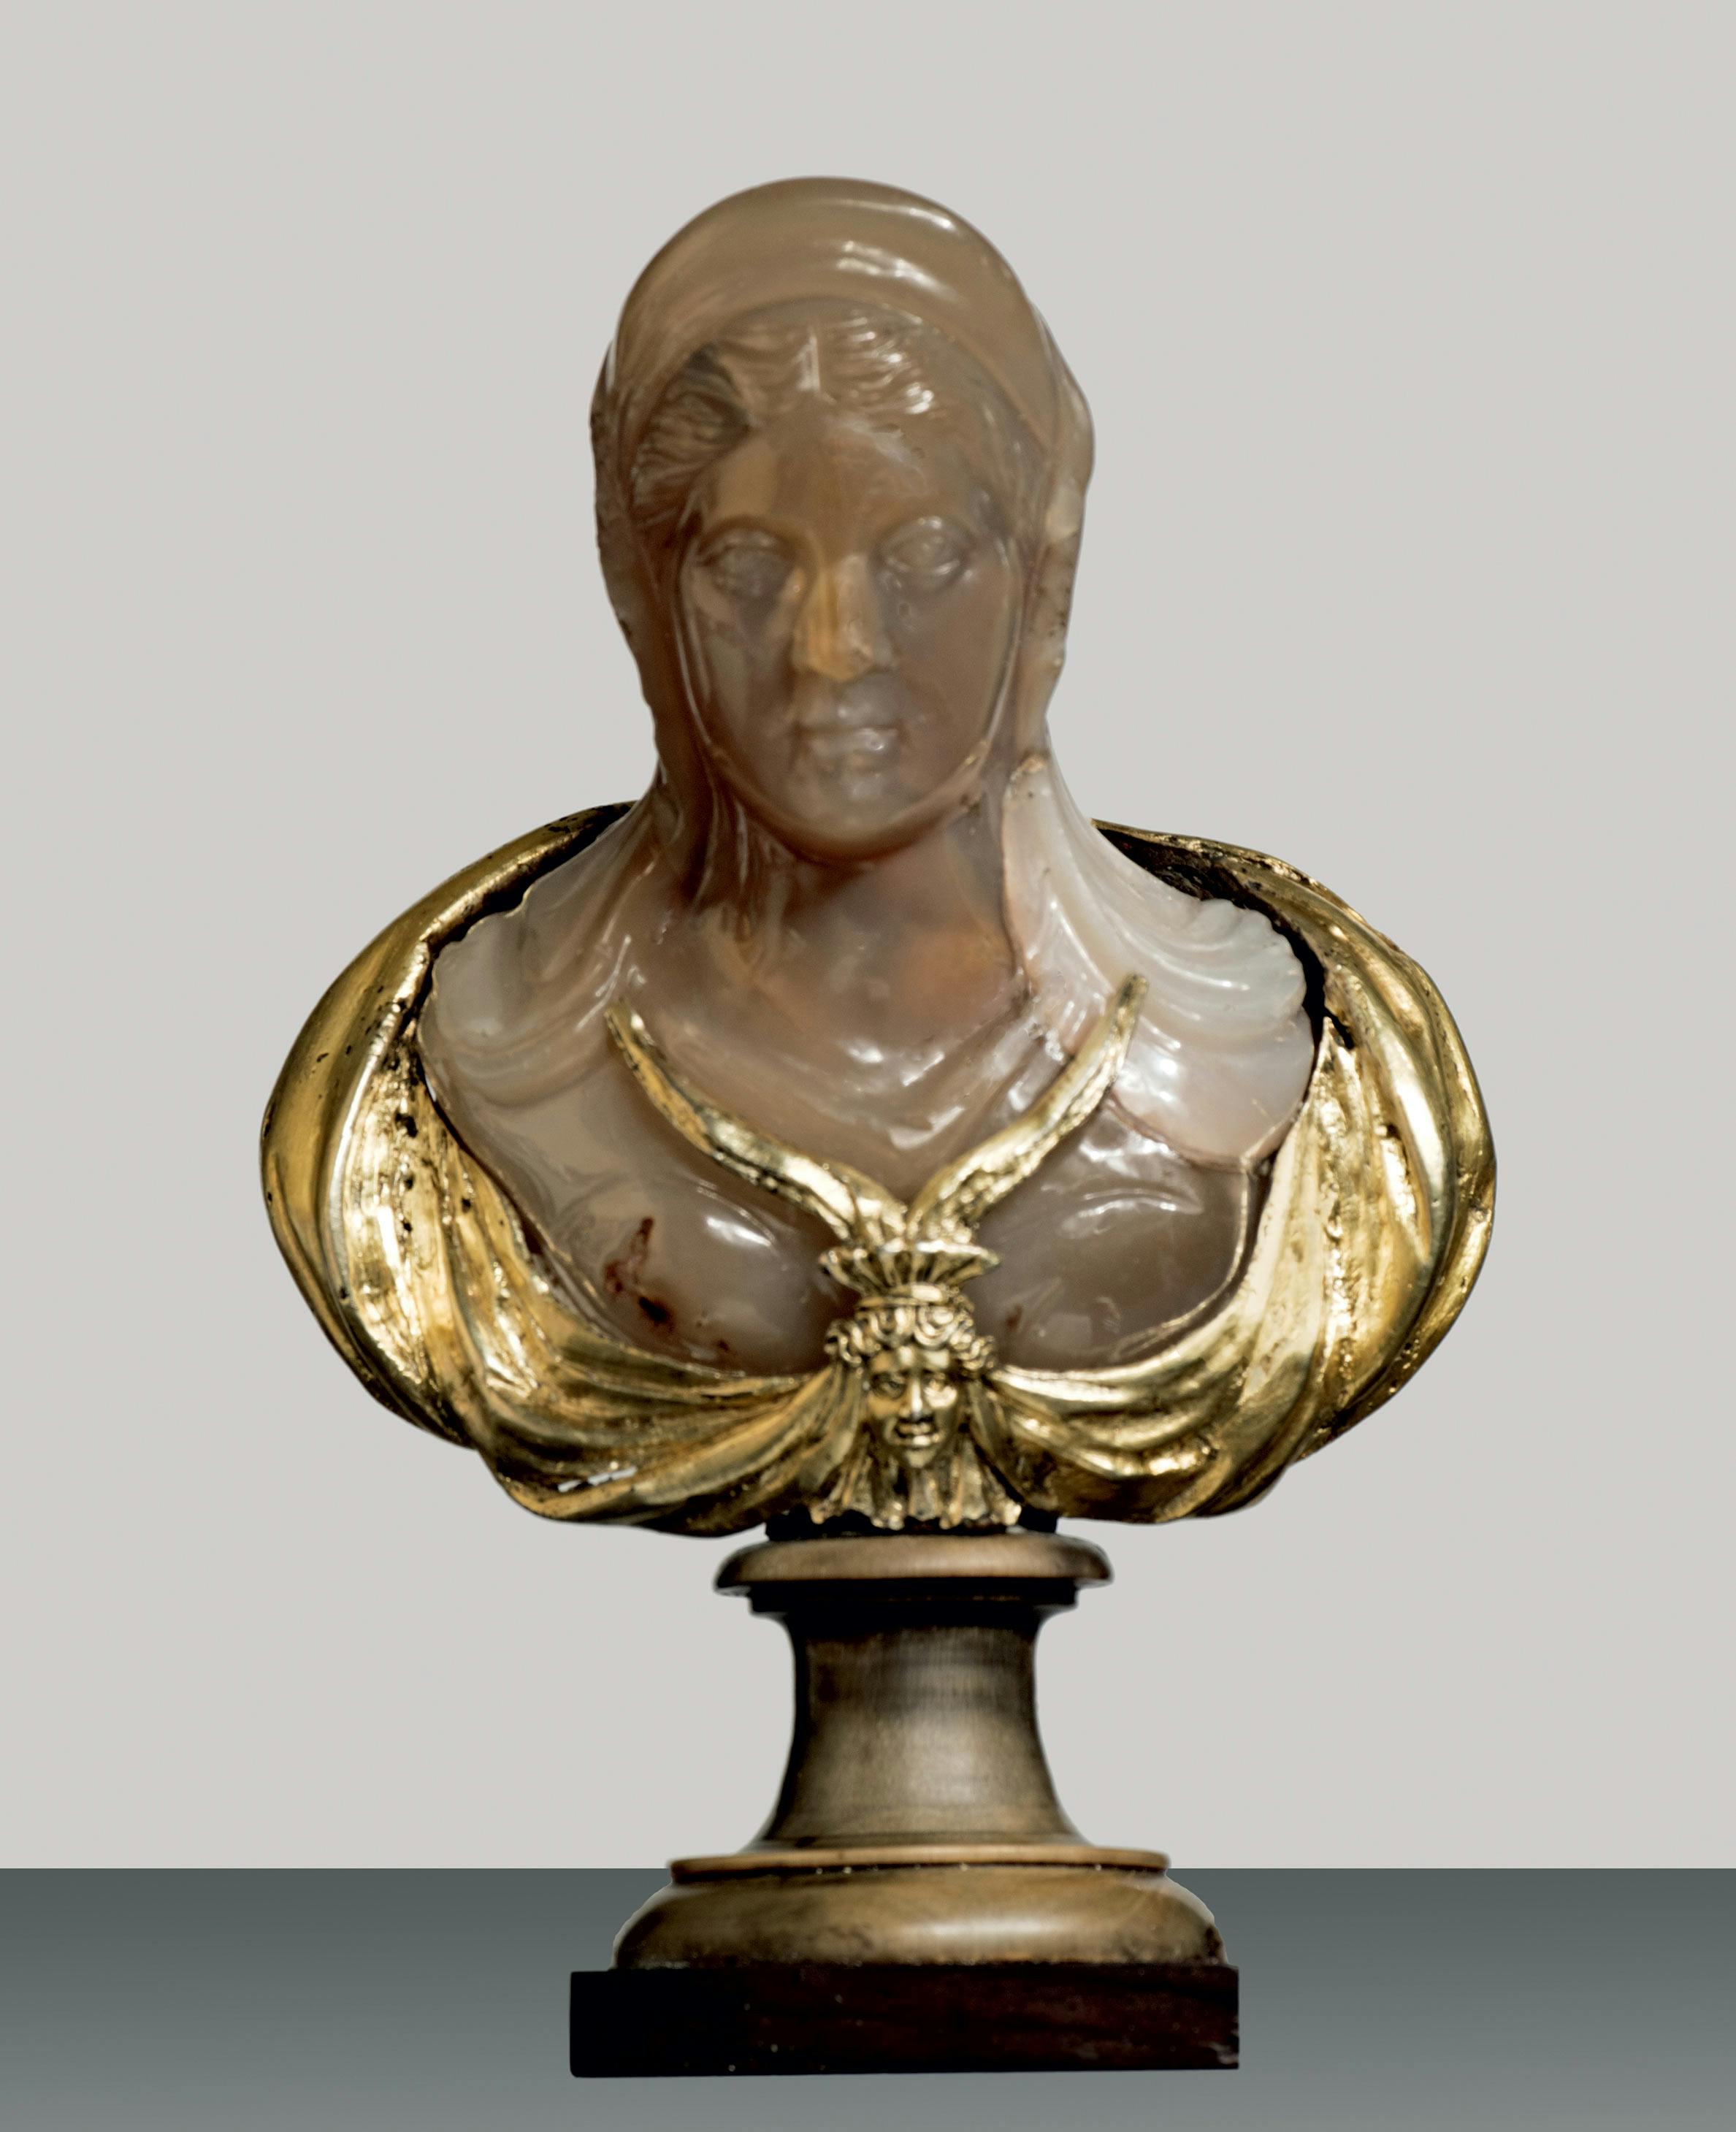 Small bust of Antonia the Younger